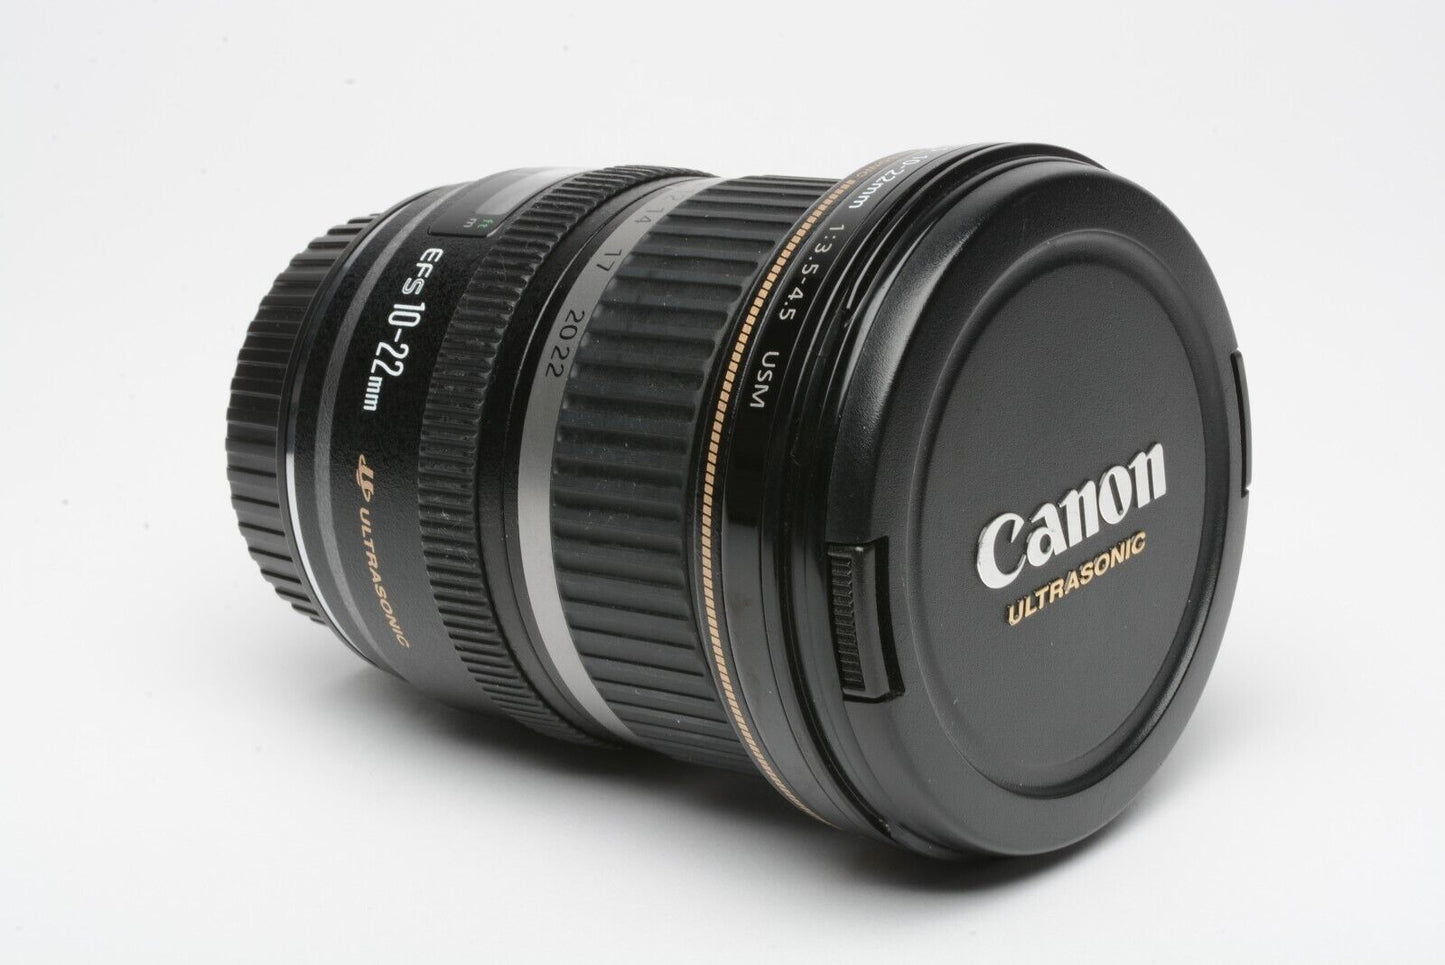 MINT- CANON EF-S 10-22mm f3.5-4.5 L LENS, CAPS, TESTED, CLEAN AND SHARP